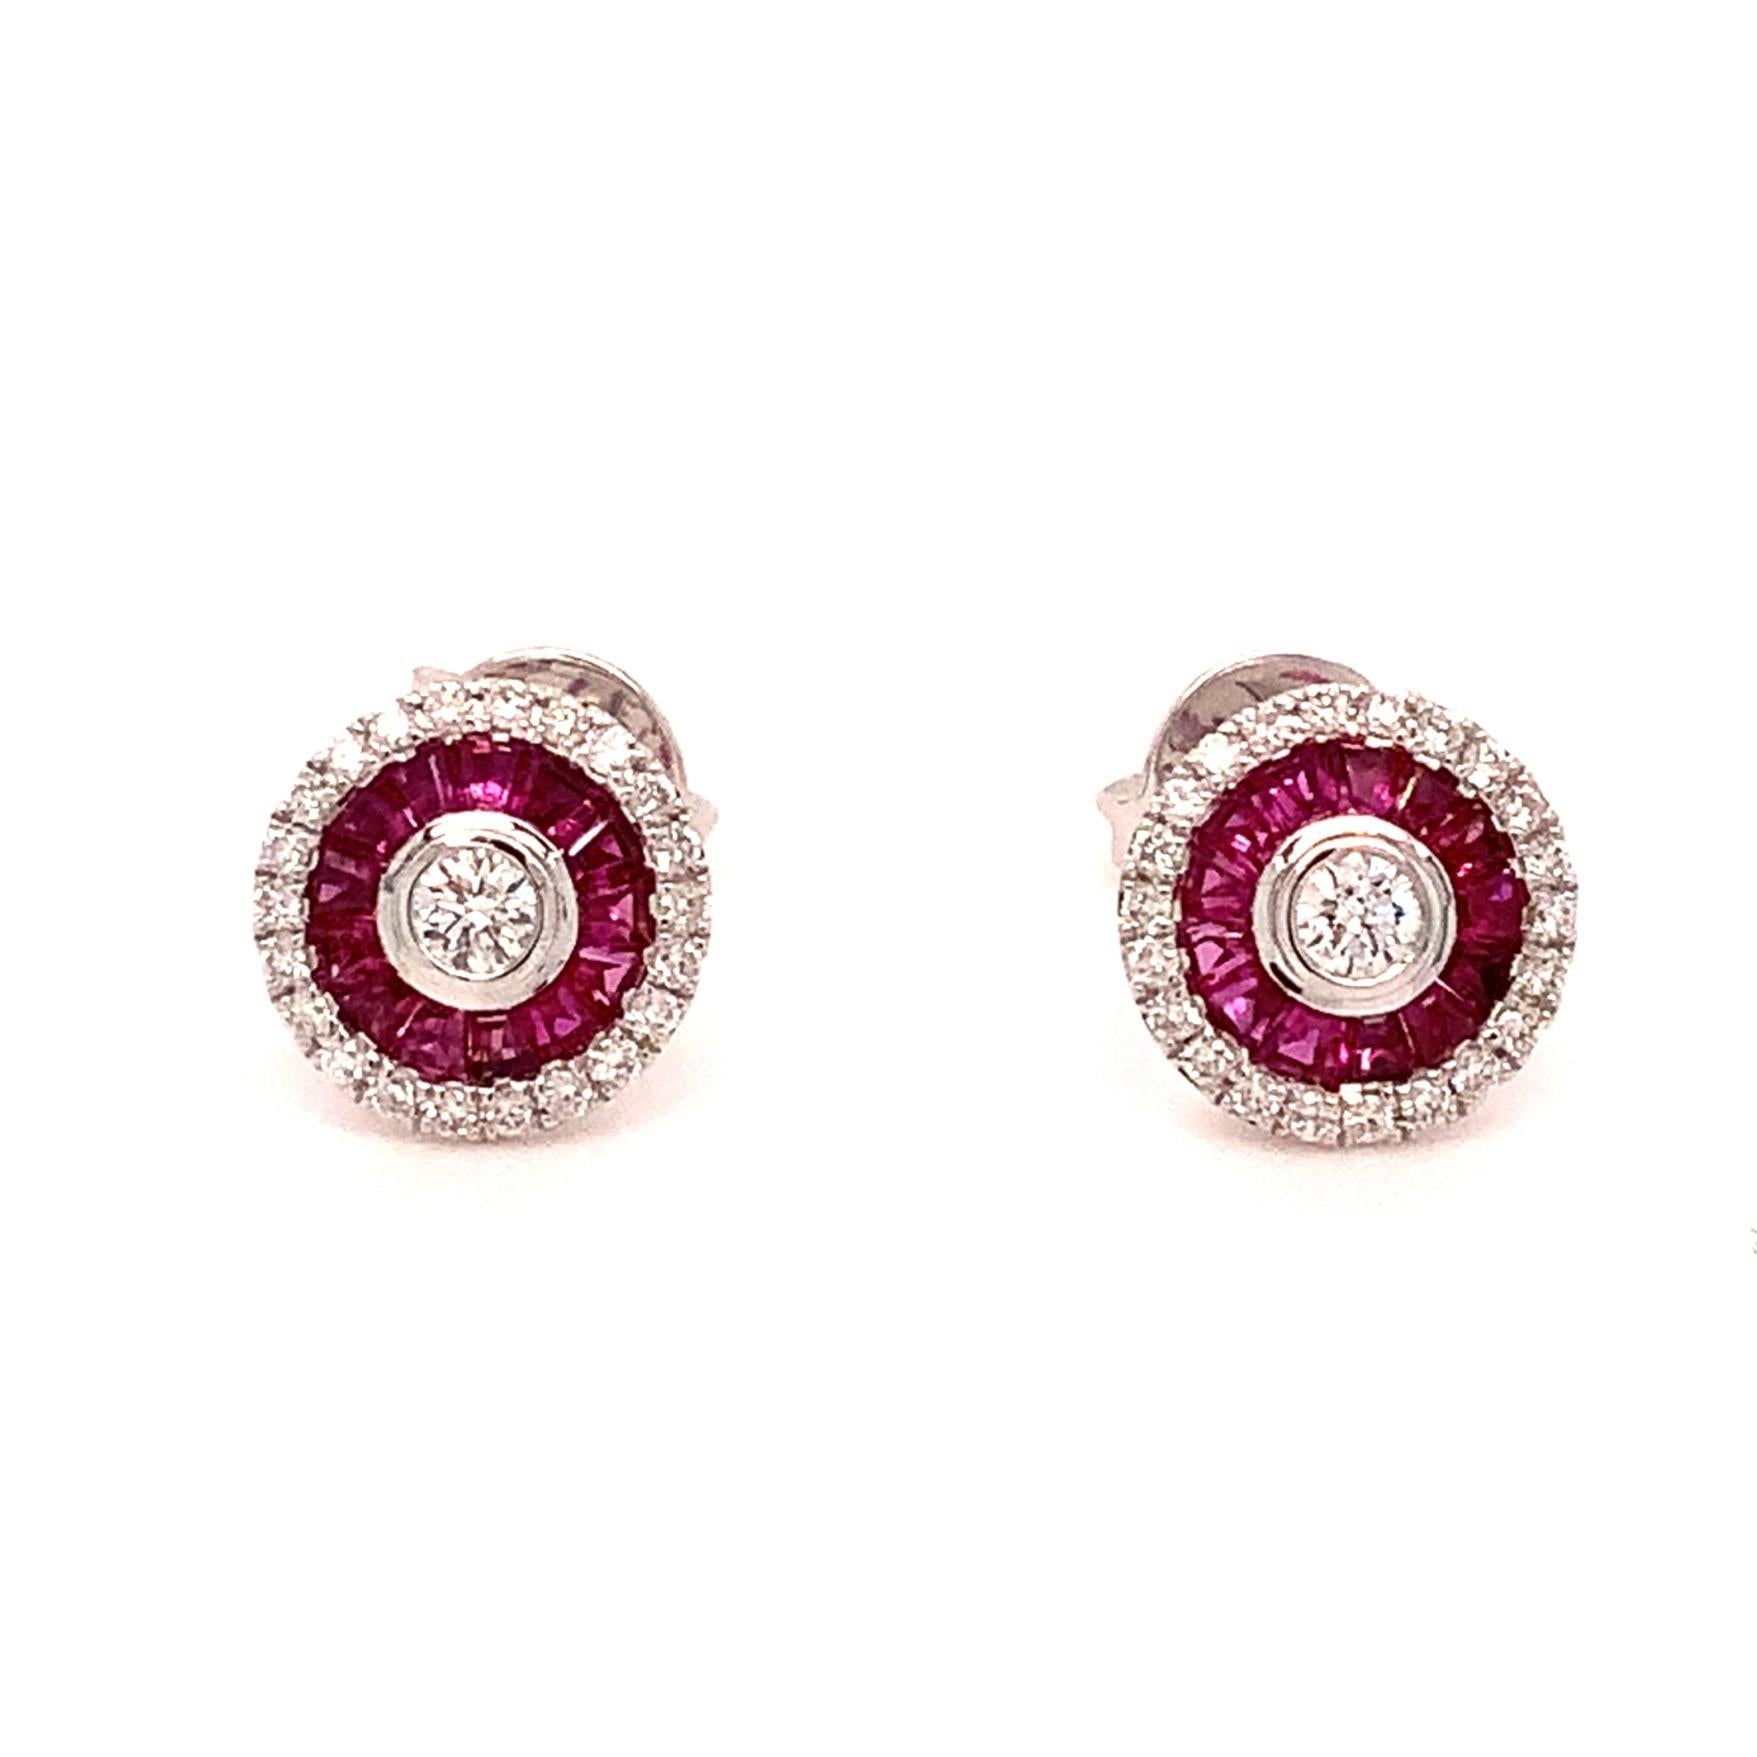 This stunning Deco Style Earring features 0.50cts T.W. of Tapered Baguette Rubies with a Fine-Medium Dark Red hue, as well as 0.33cts T.W. of Brilliant Cut Diamonds in F Color and SI Clarity, crafted with top-notch Make and Polish. The Earring has a